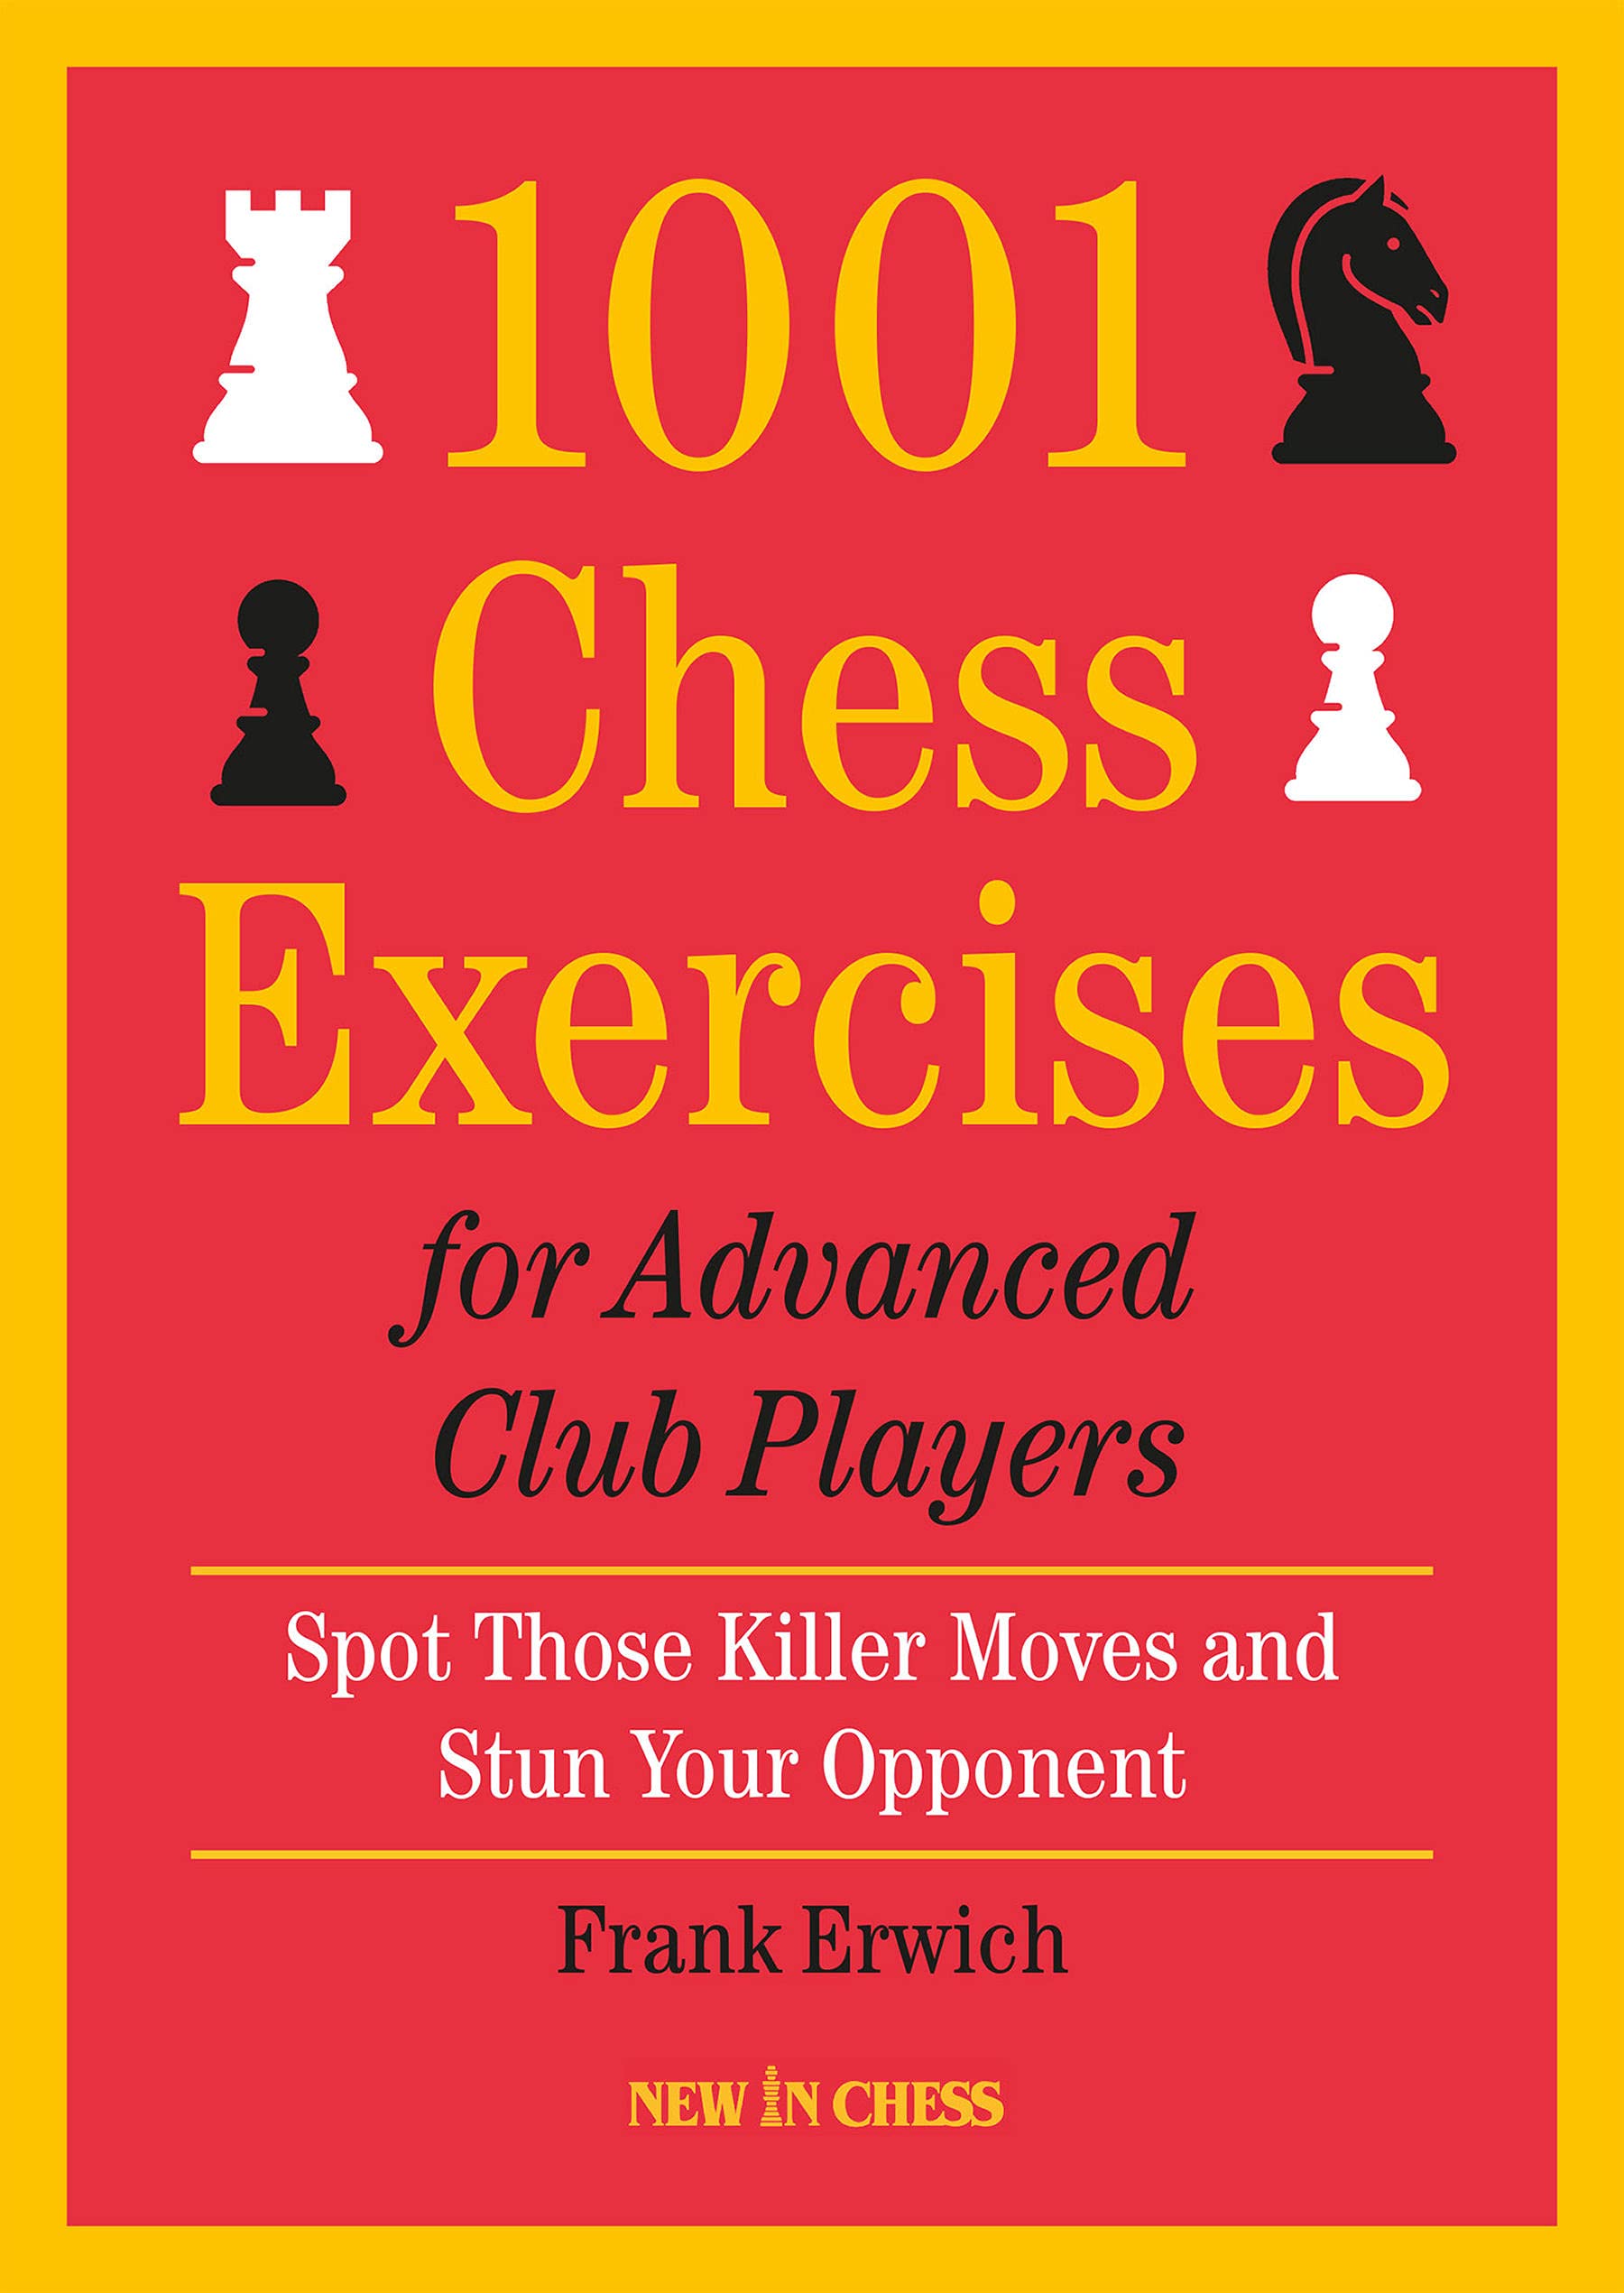 1001 Chess Exercises for Advanced Club Players, Frank Erwich, New in Chess, 31 December 2021, ISBN-13 ‏ : ‎ 978-9056919702